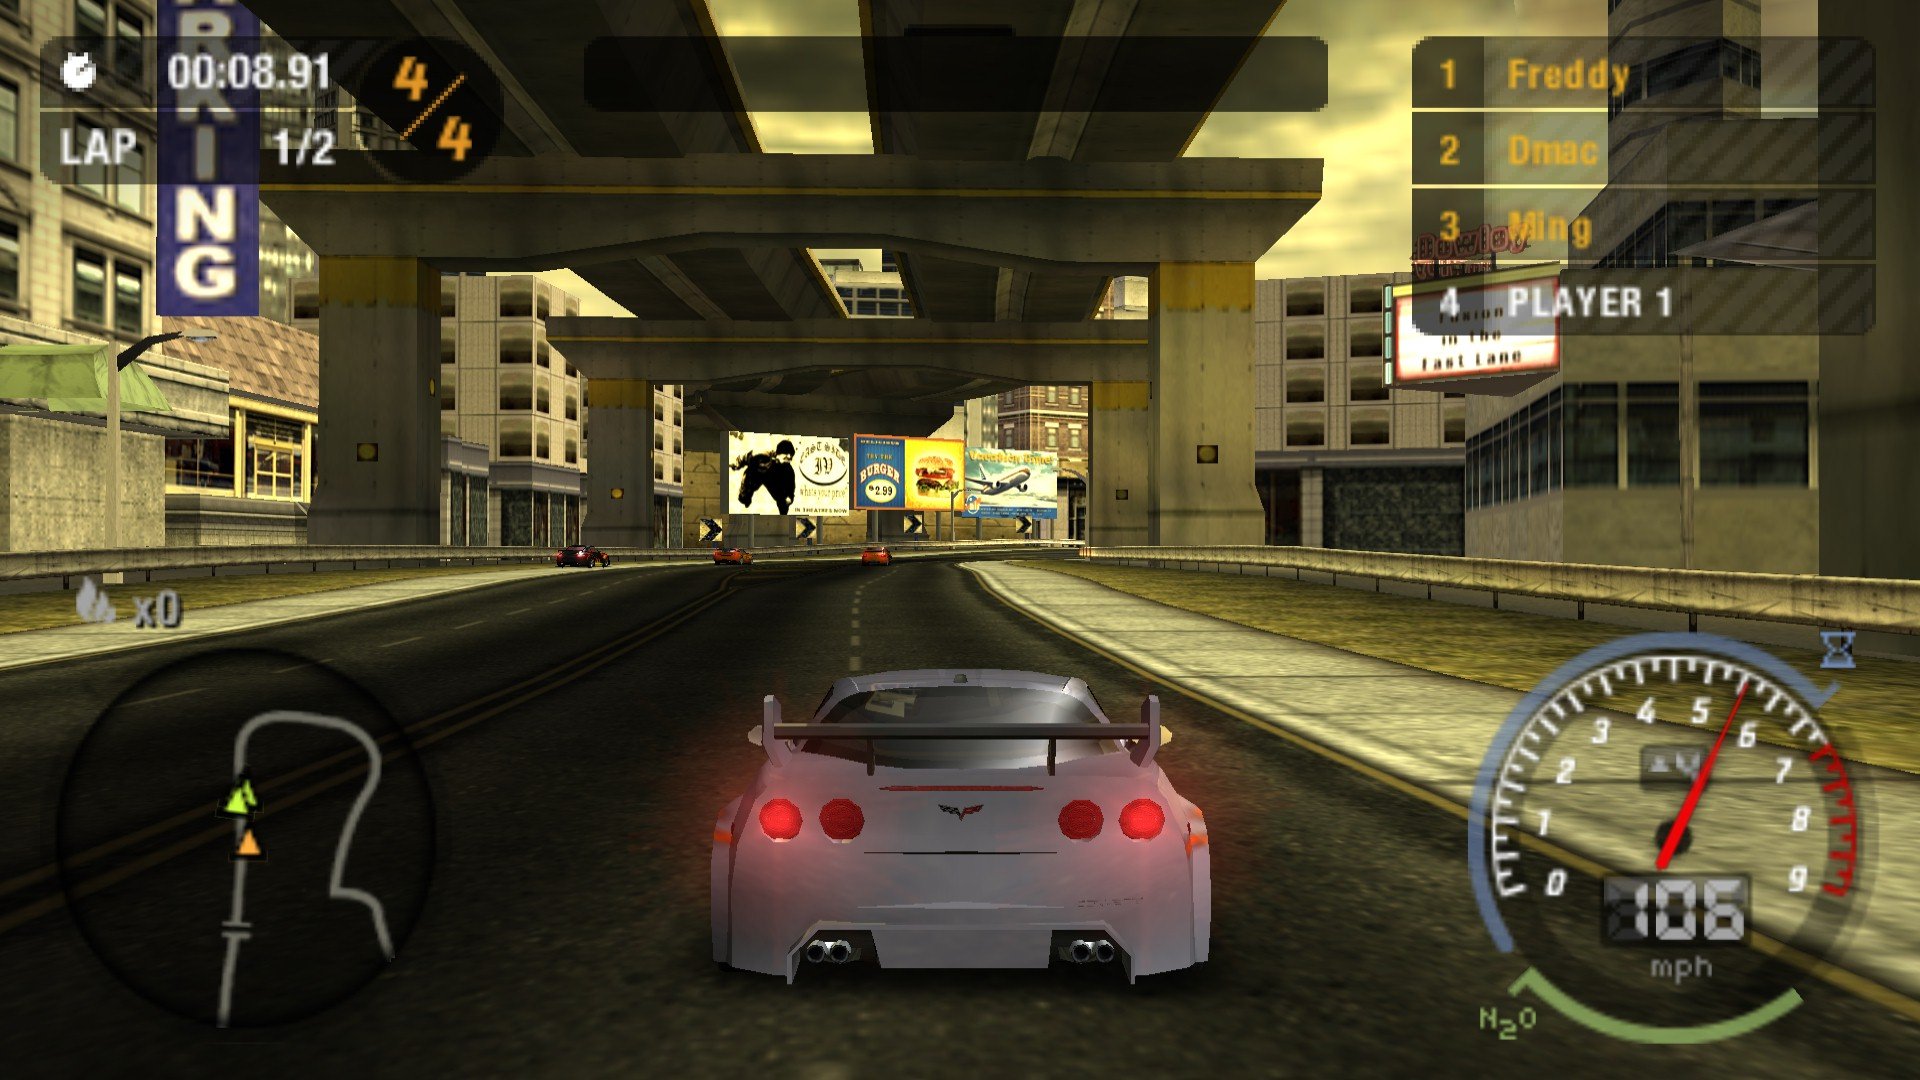 kumpulan game ppsspp android